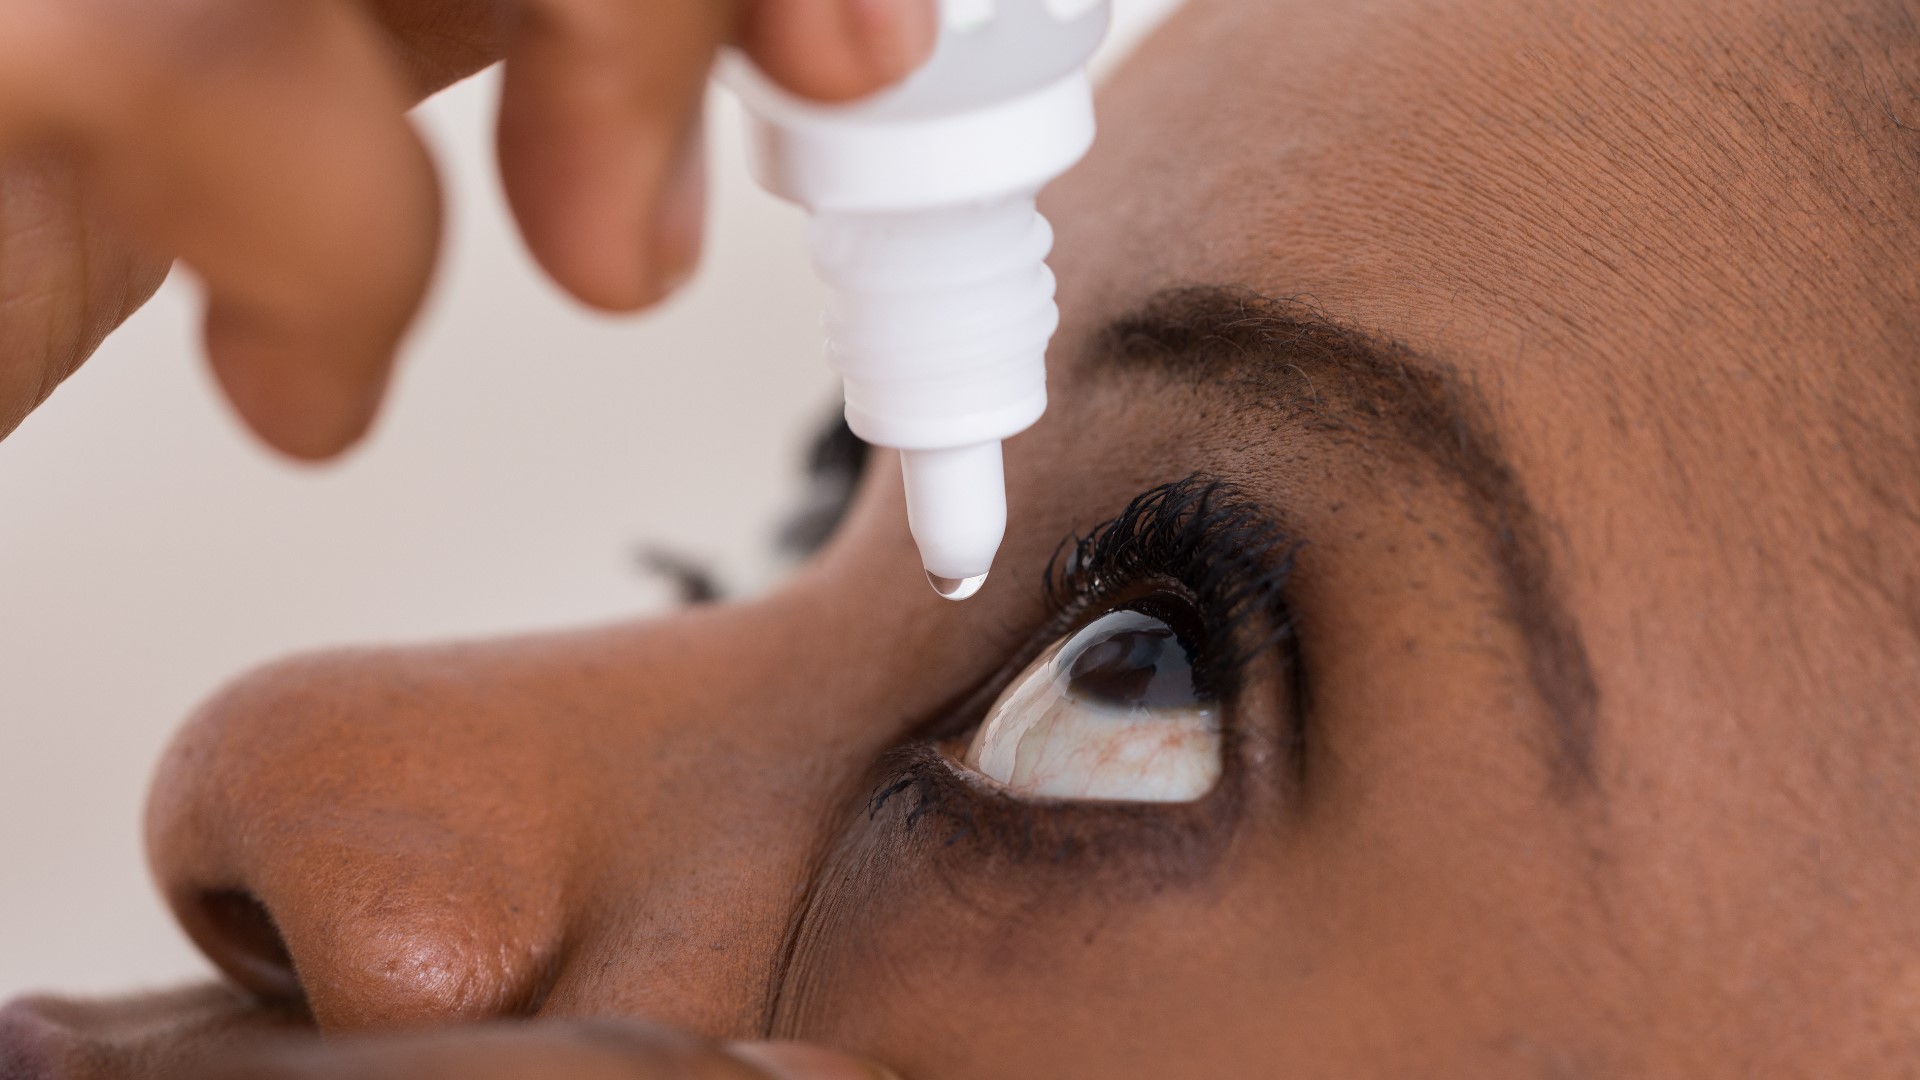 The FDA says eight companies are "illegally" marketing products claiming to treat conditions such as pink eye and glaucoma.